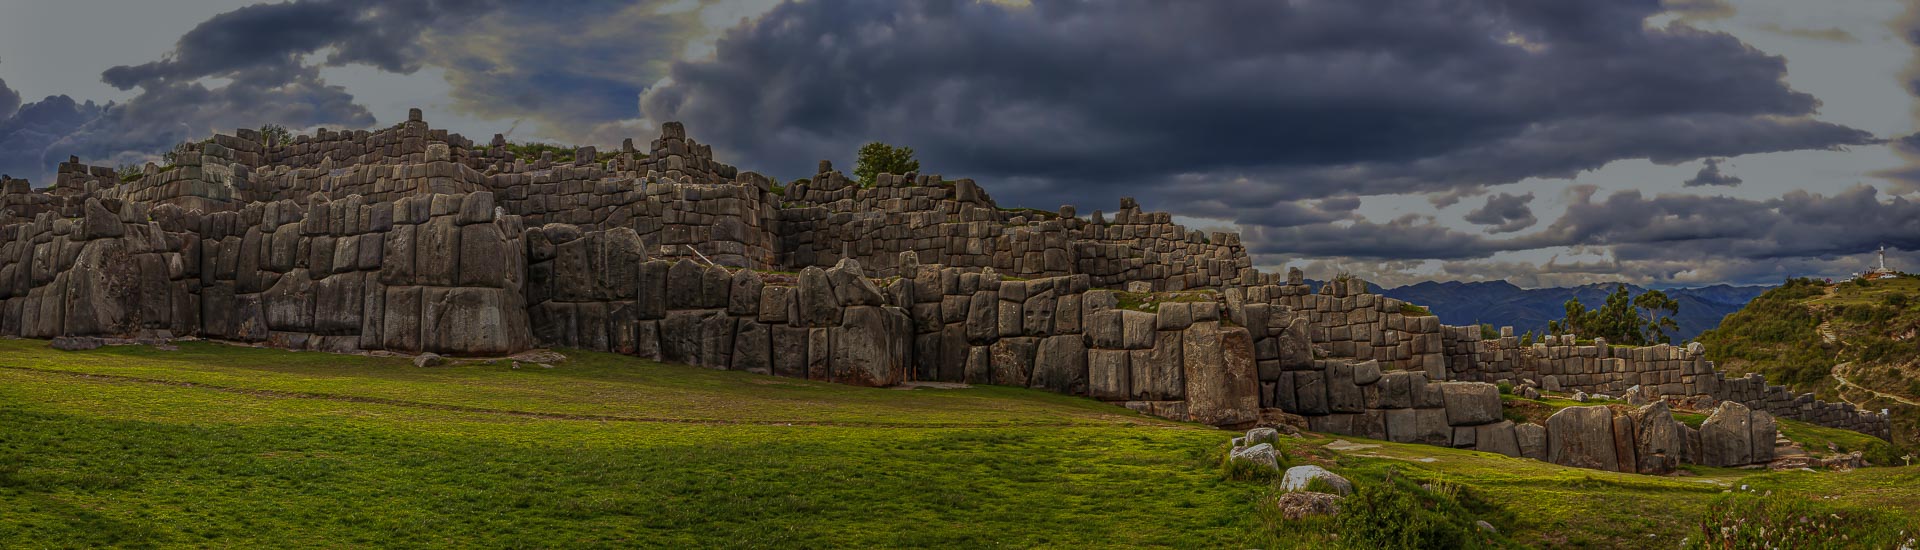 Walls of Sacsayhuaman Fortress in Cusco Peru Reise